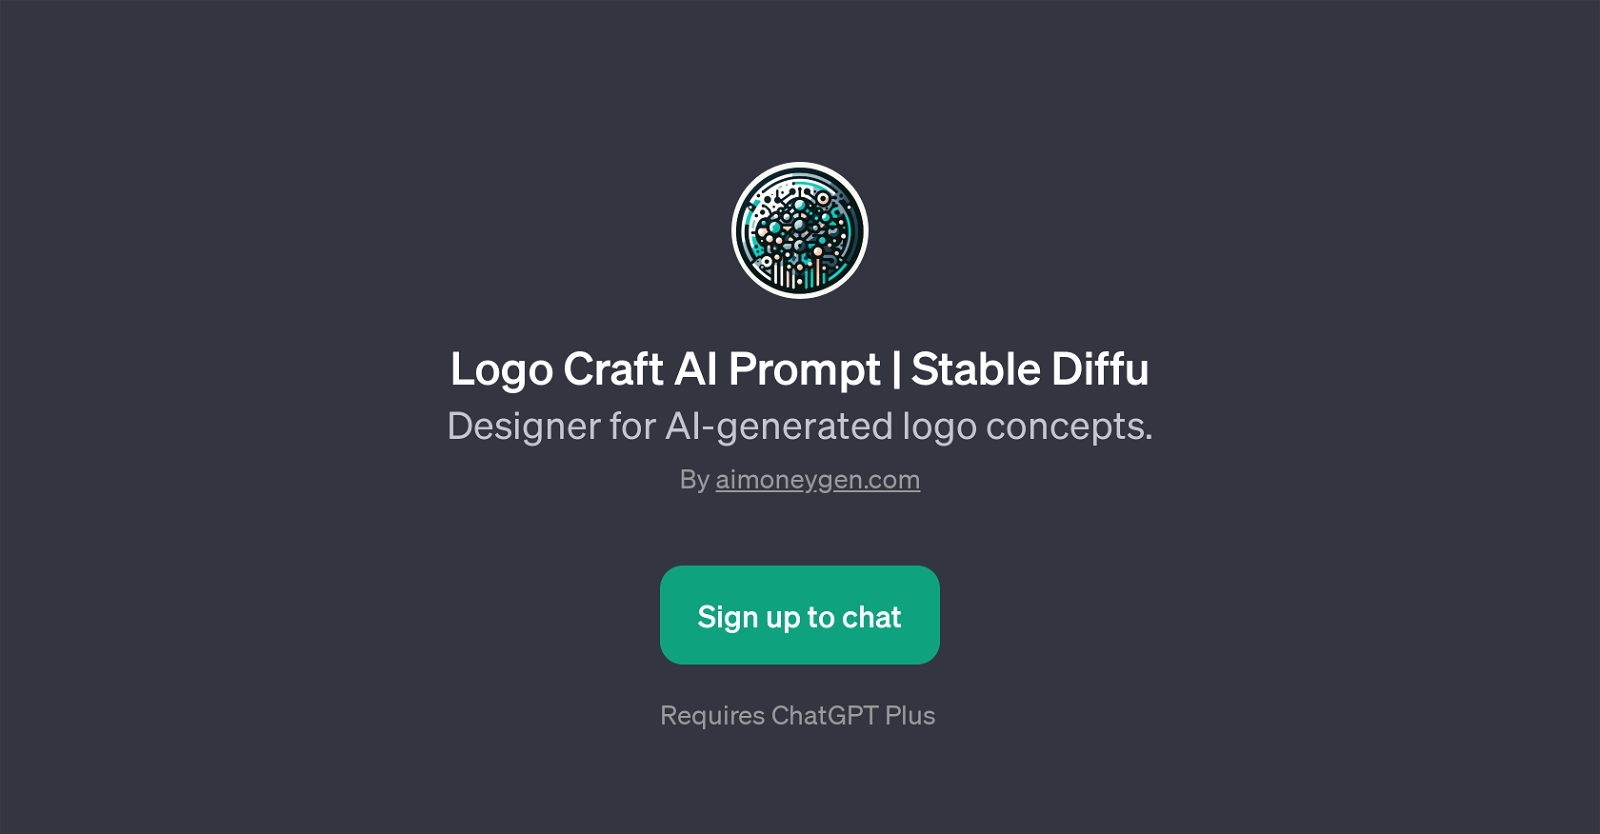 Logo Craft AI Prompt | Stable Diffu website